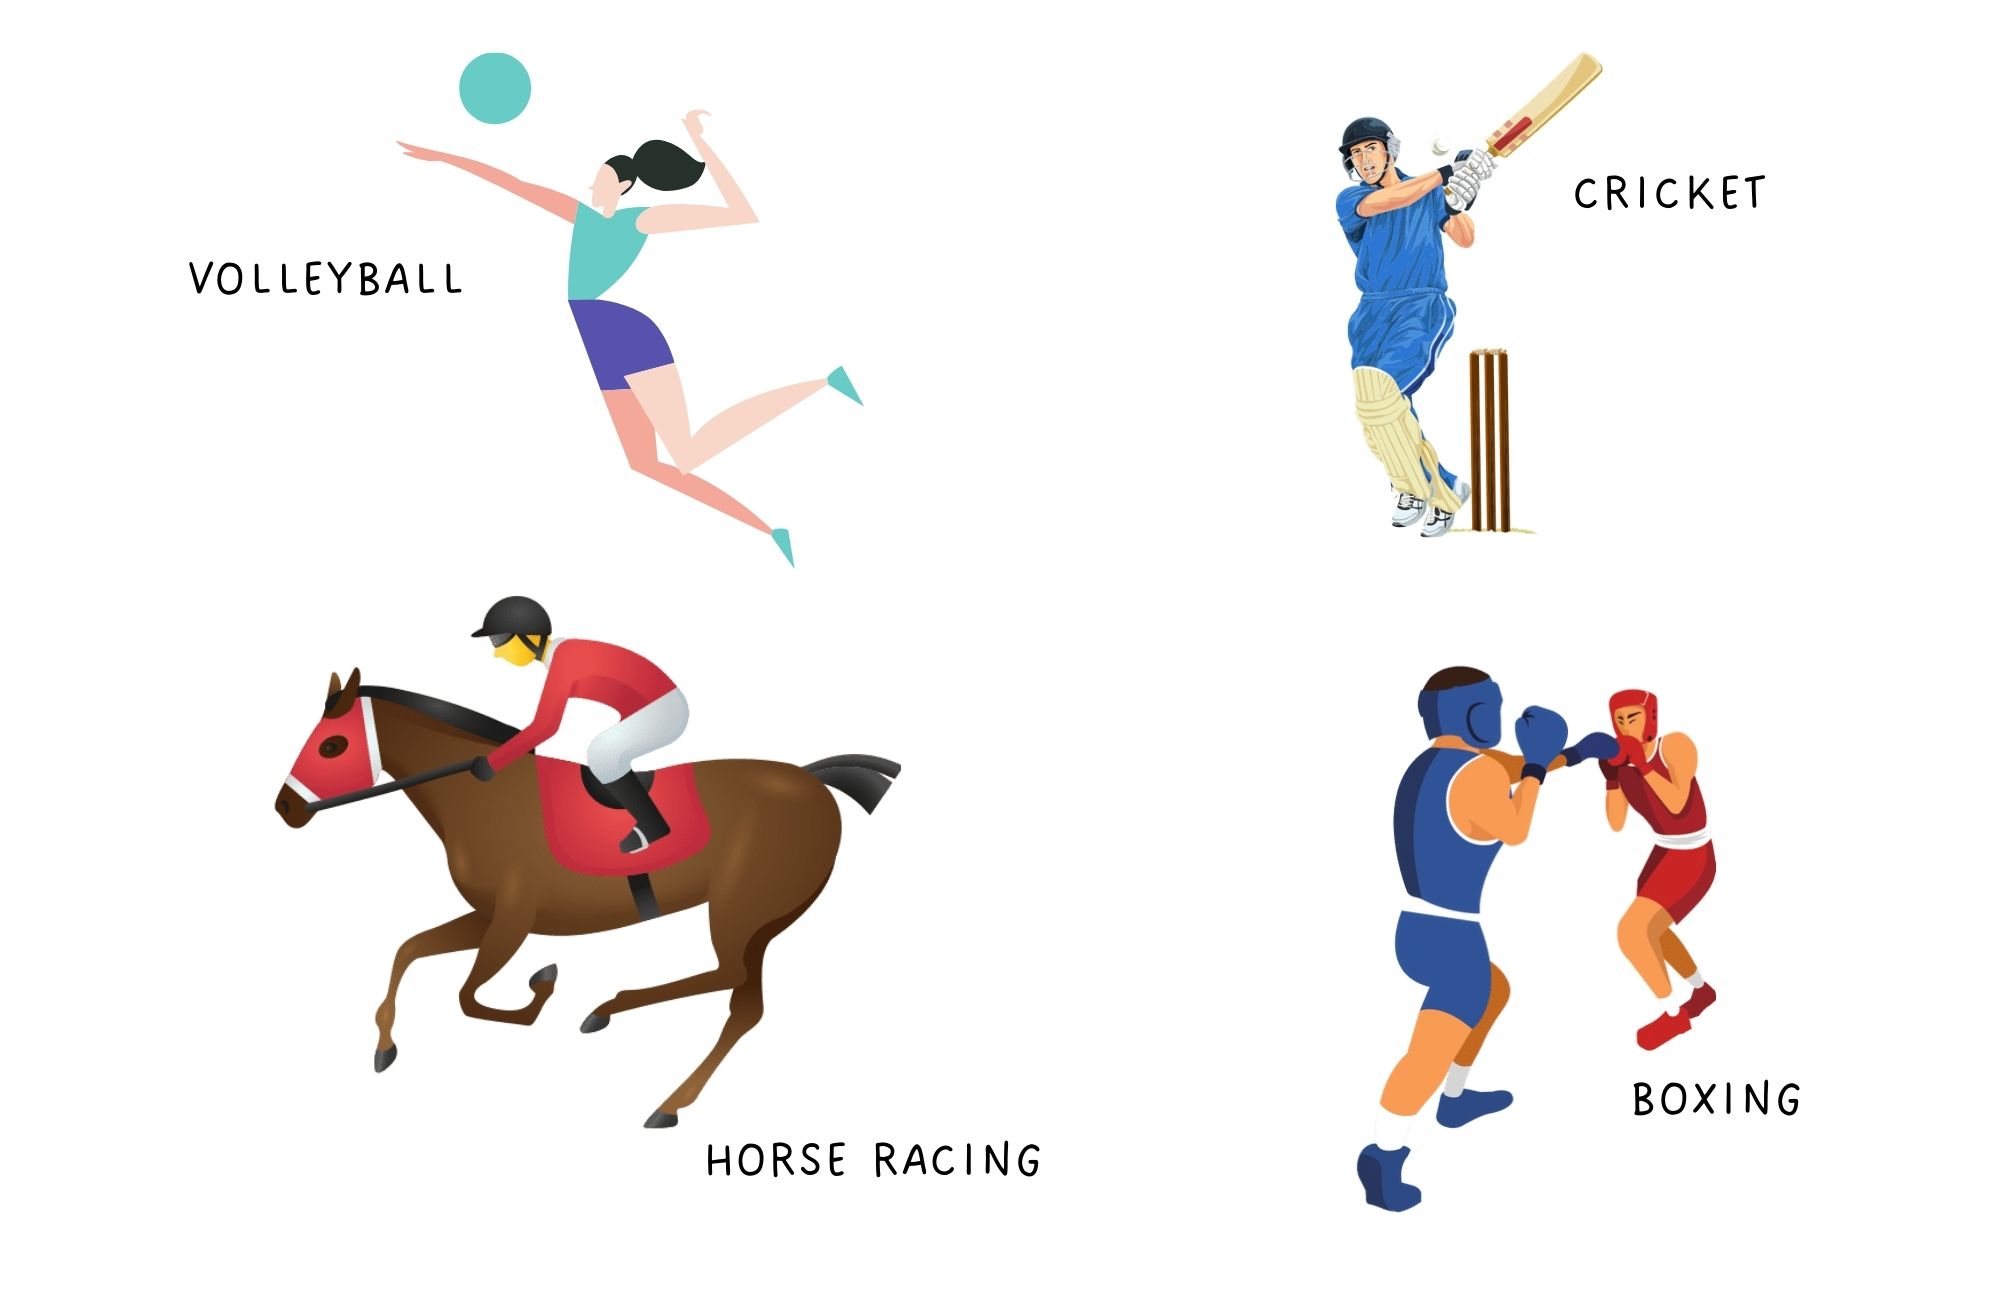 Different types of sports such as volleyball, cricket, horse racing, and boxing